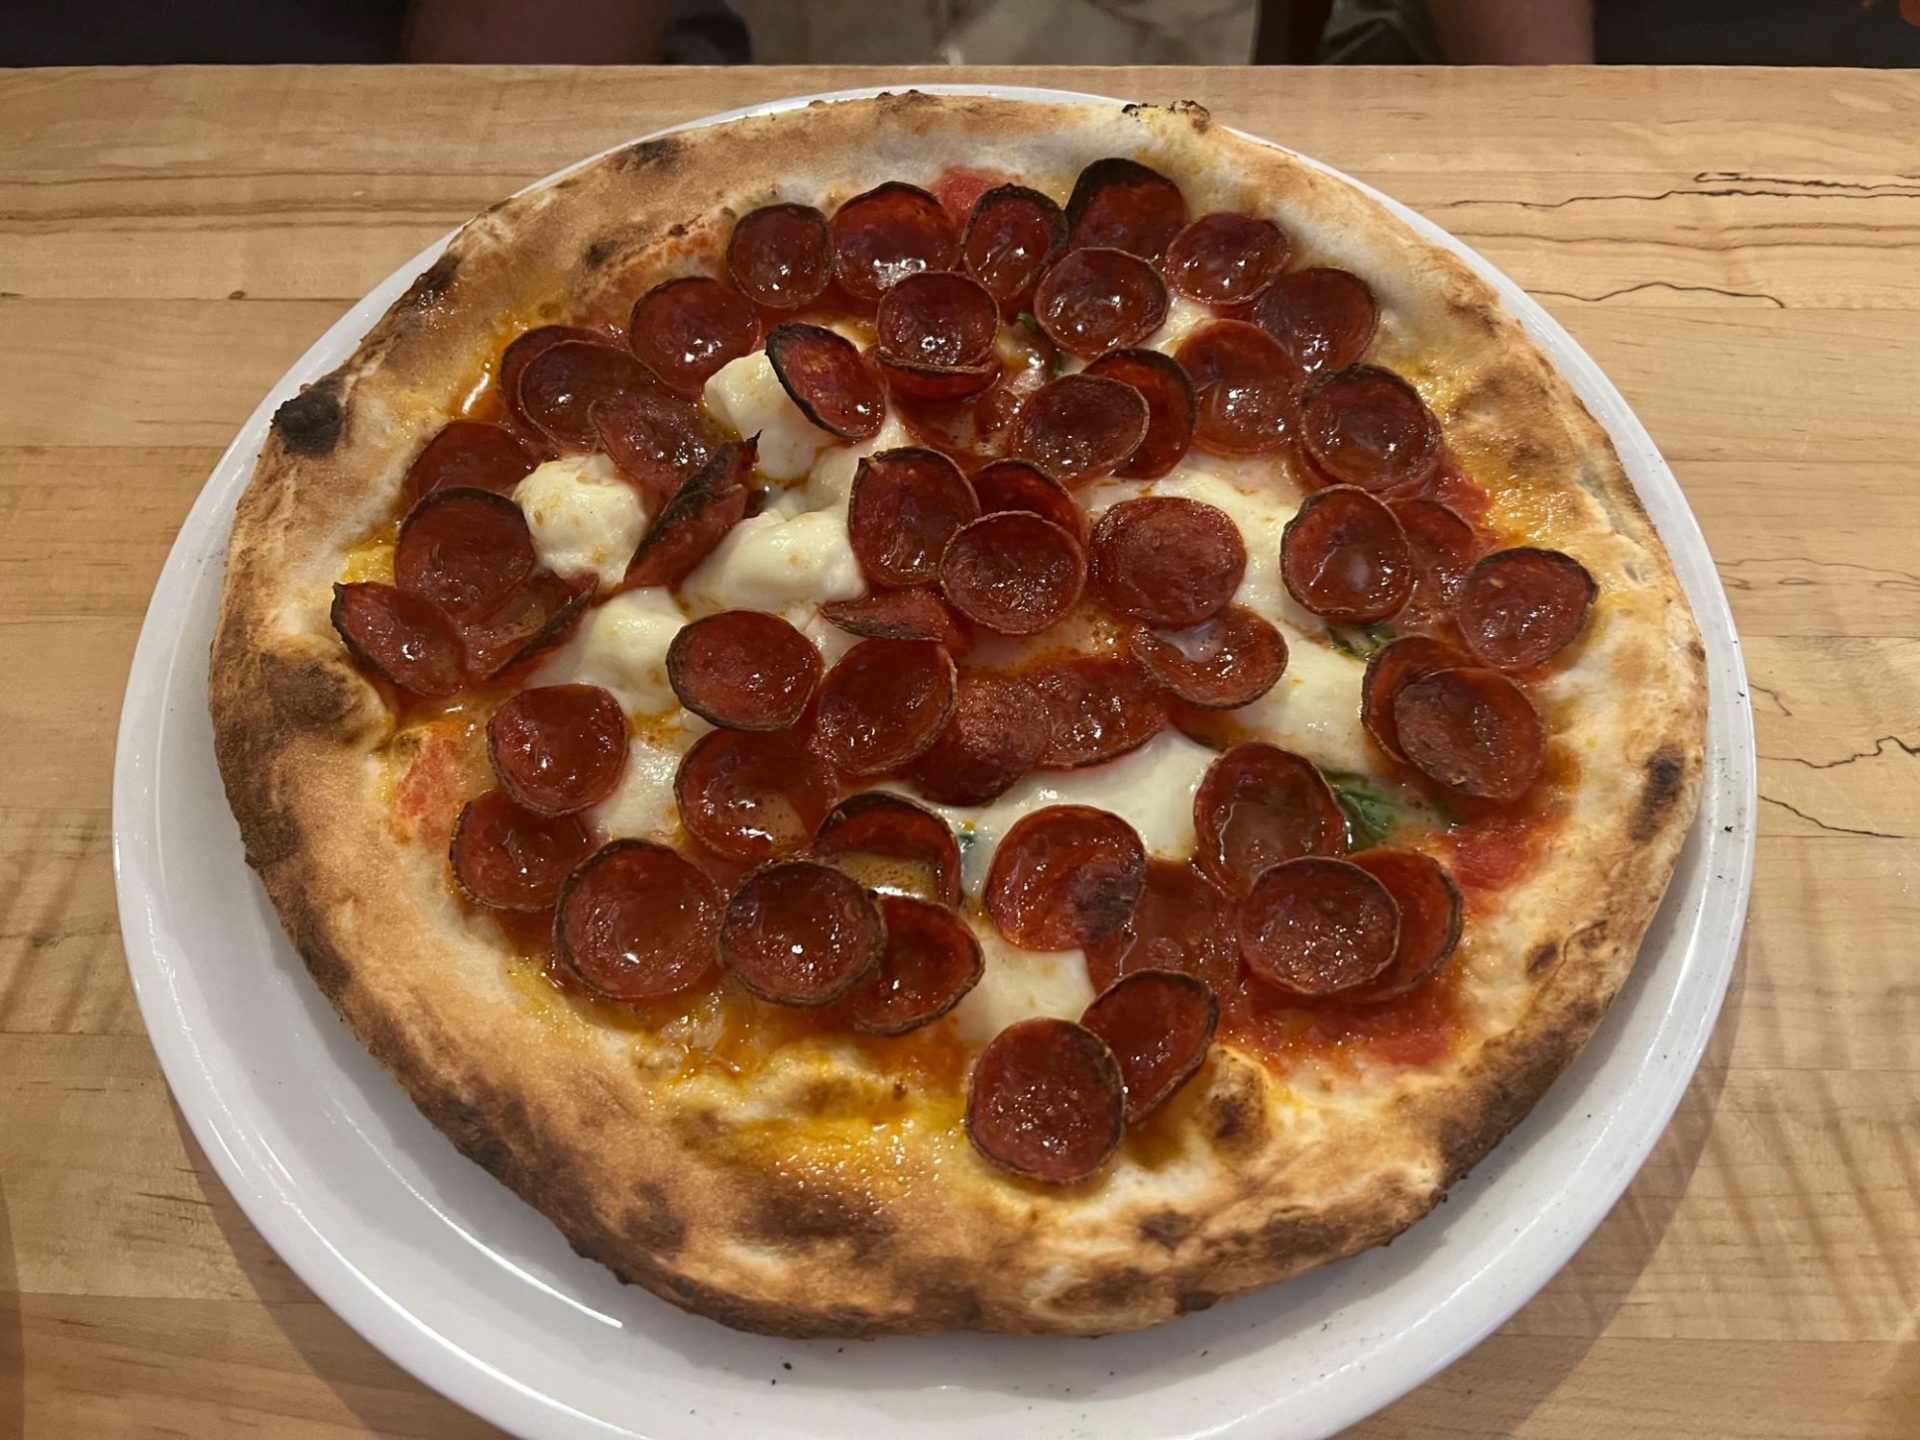 A round wood fired pizza covered in pepperoni.